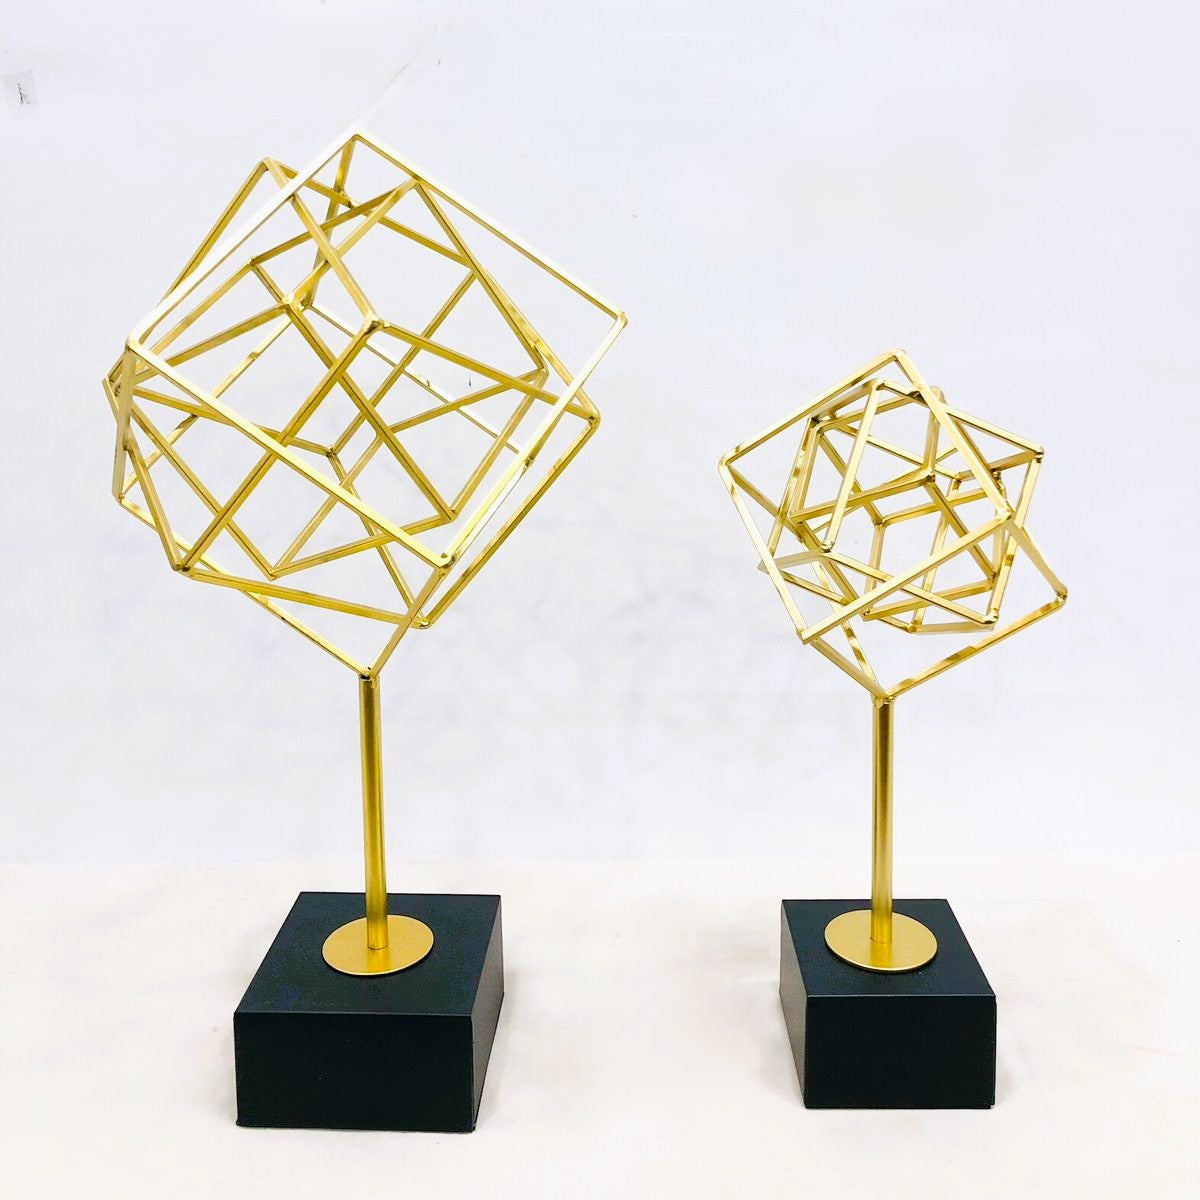 MESH OF CUBES - METAL TABLE DECOR